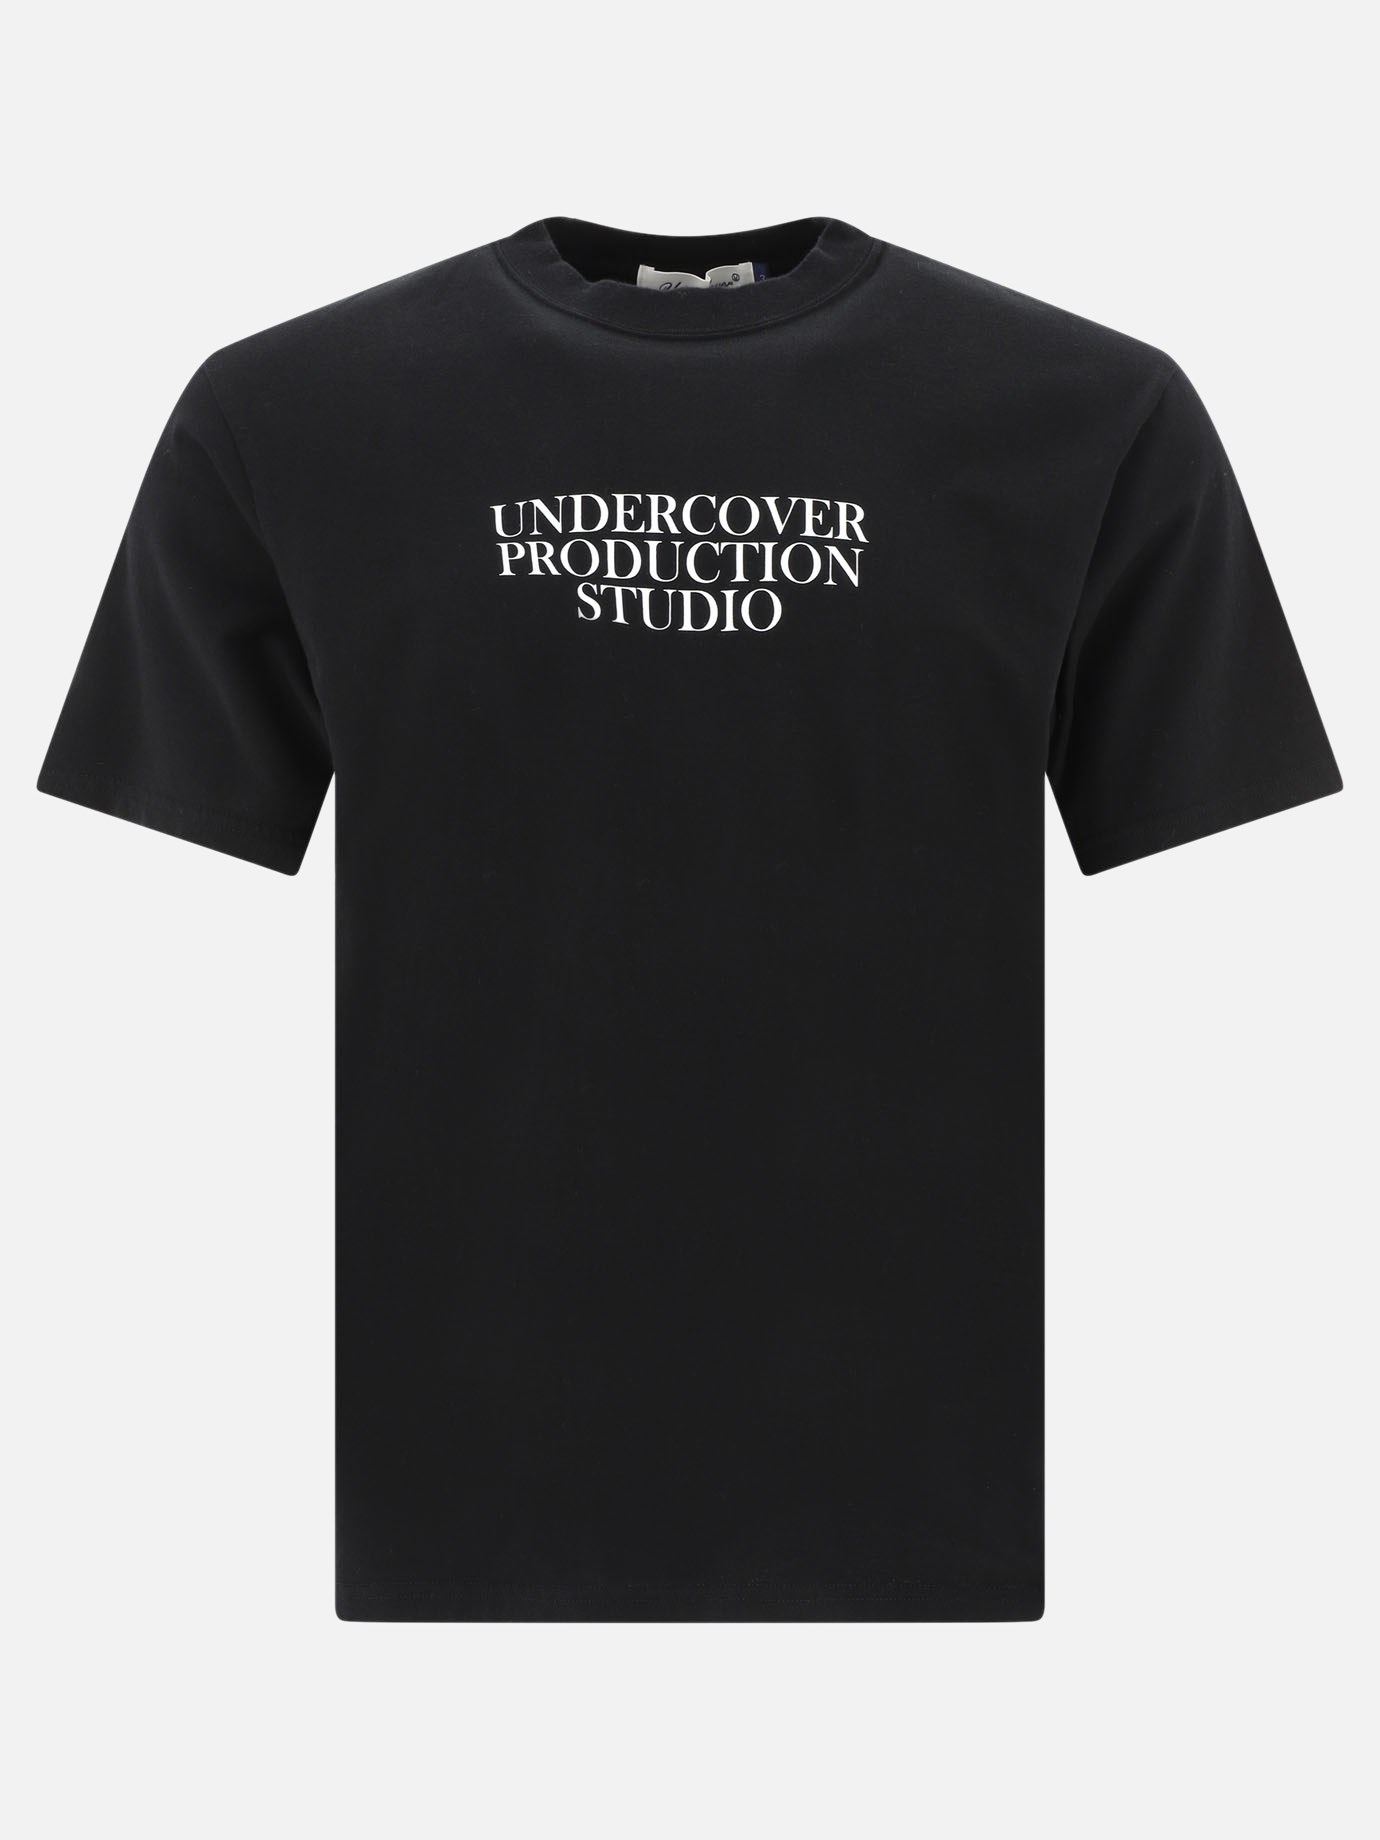 T-shirt  Production Studio by Undercover - 2